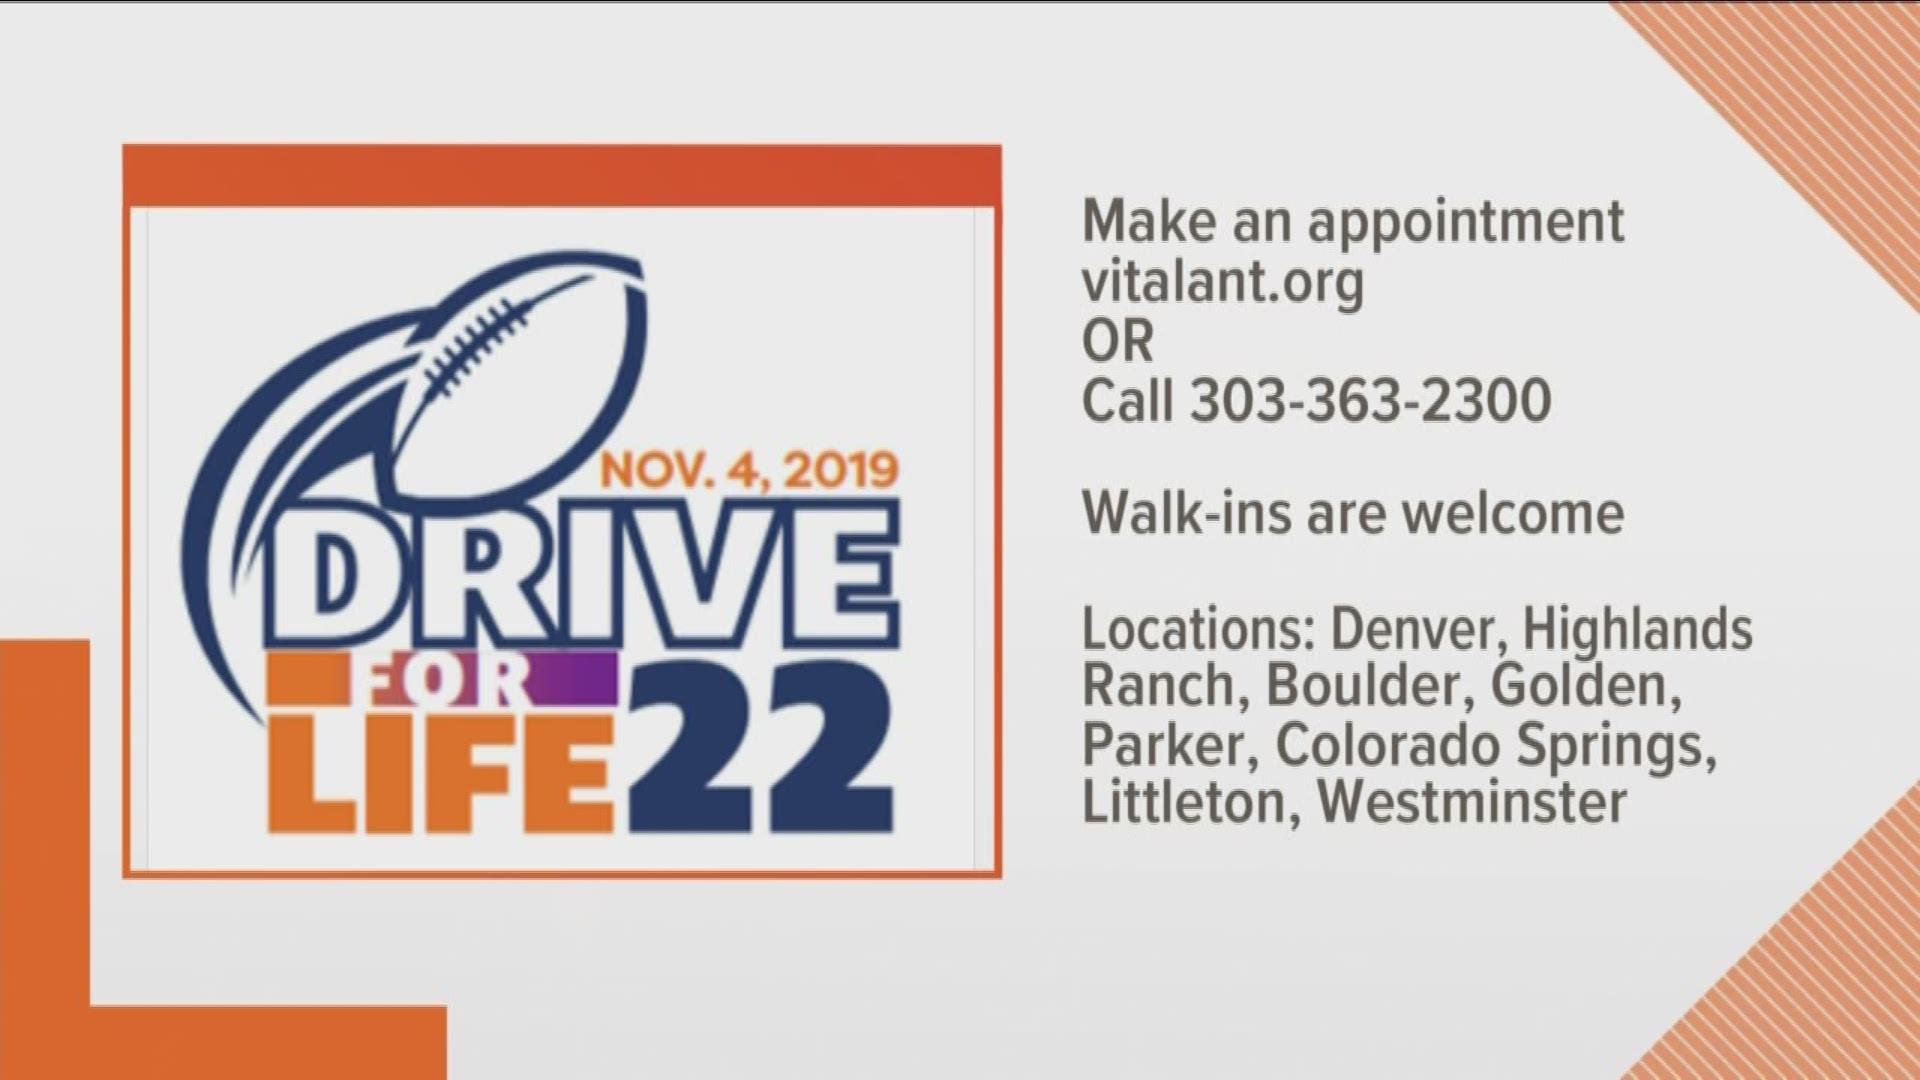 You can celebrate the Denver Broncos win on Sunday by donating blood at the 22nd annual Drive For Life blood drive hosted by Vitalant.